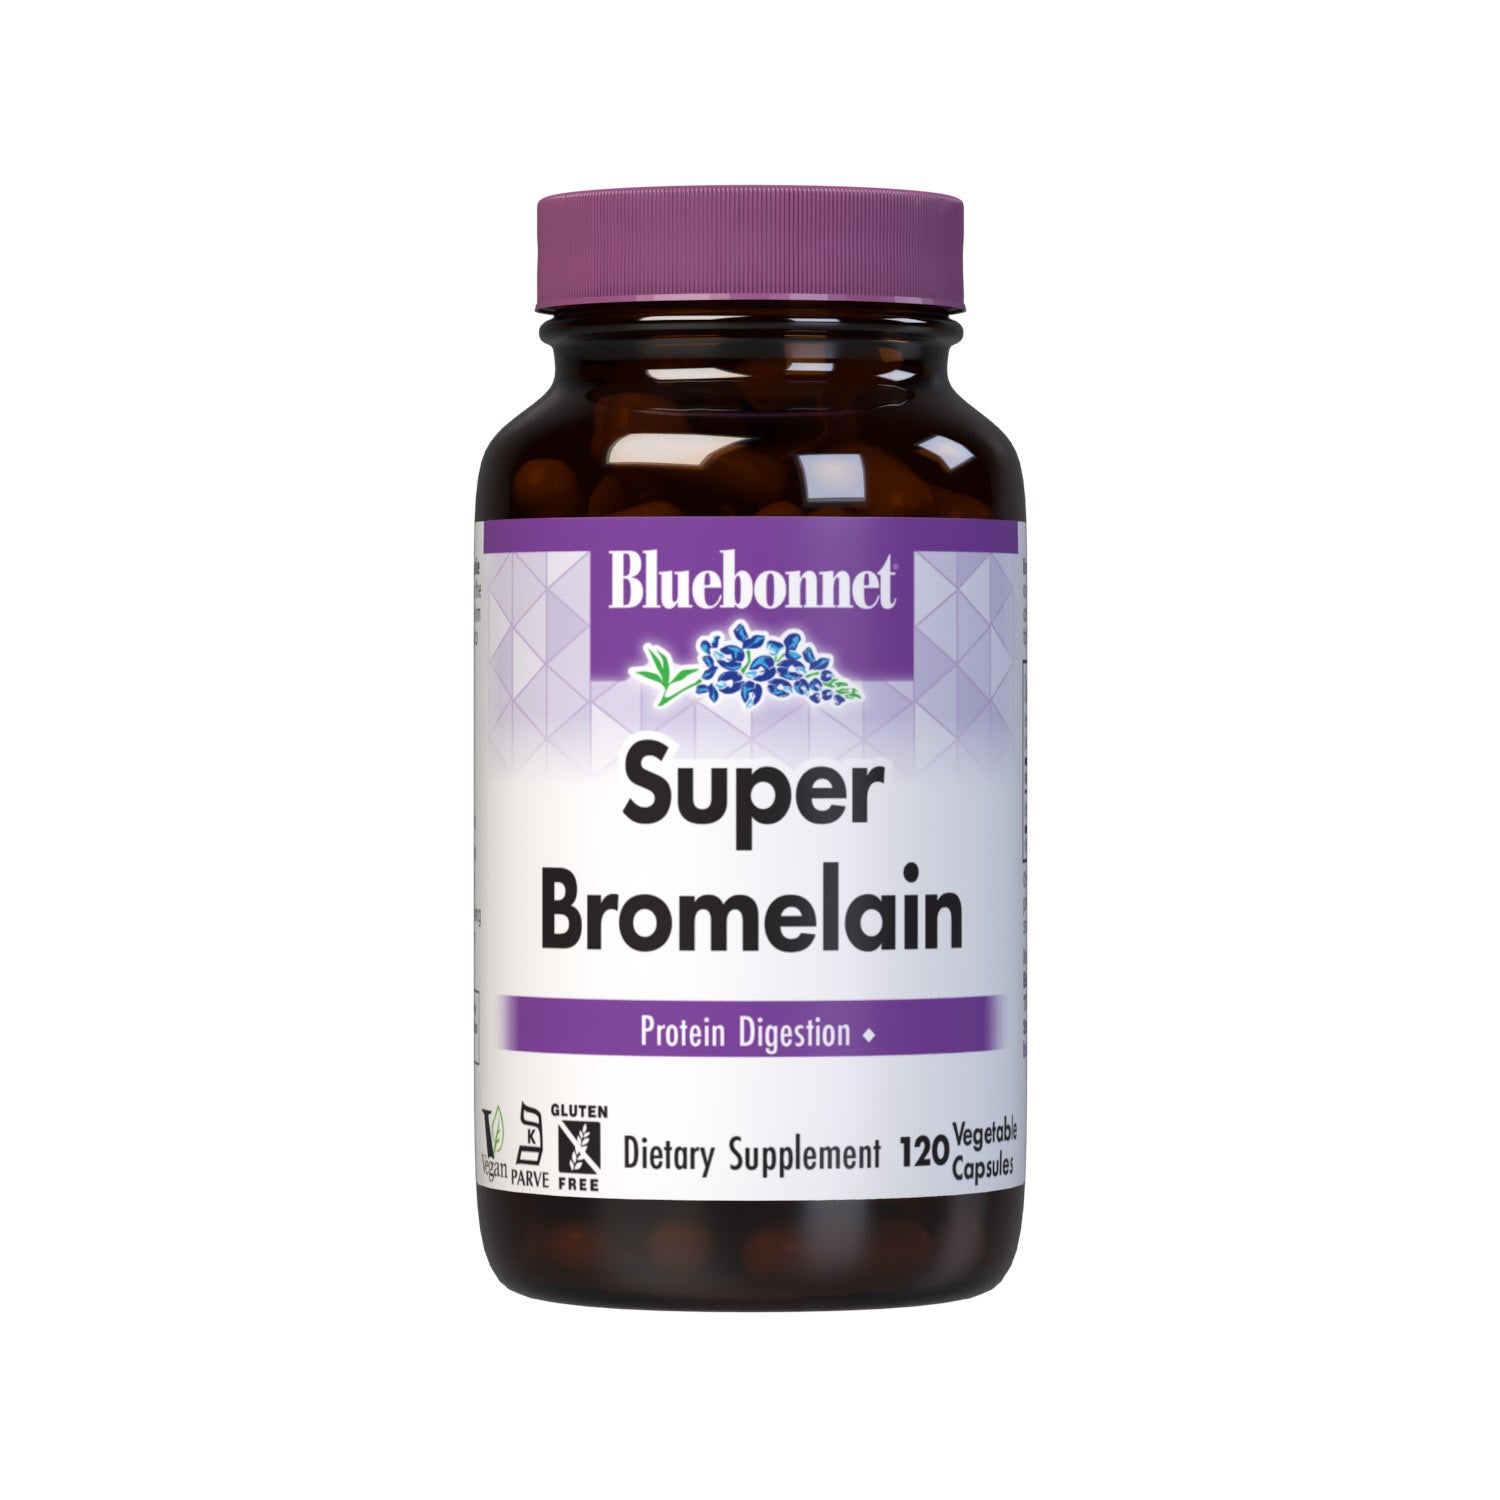 Bluebonnet’s Super Bromelain 500 mg 120 Vegetable Capsules are formulated with 2400 GDU/gm of bromelain from pineapple. Bromelain assists in the digestion of protein. #size_120 count